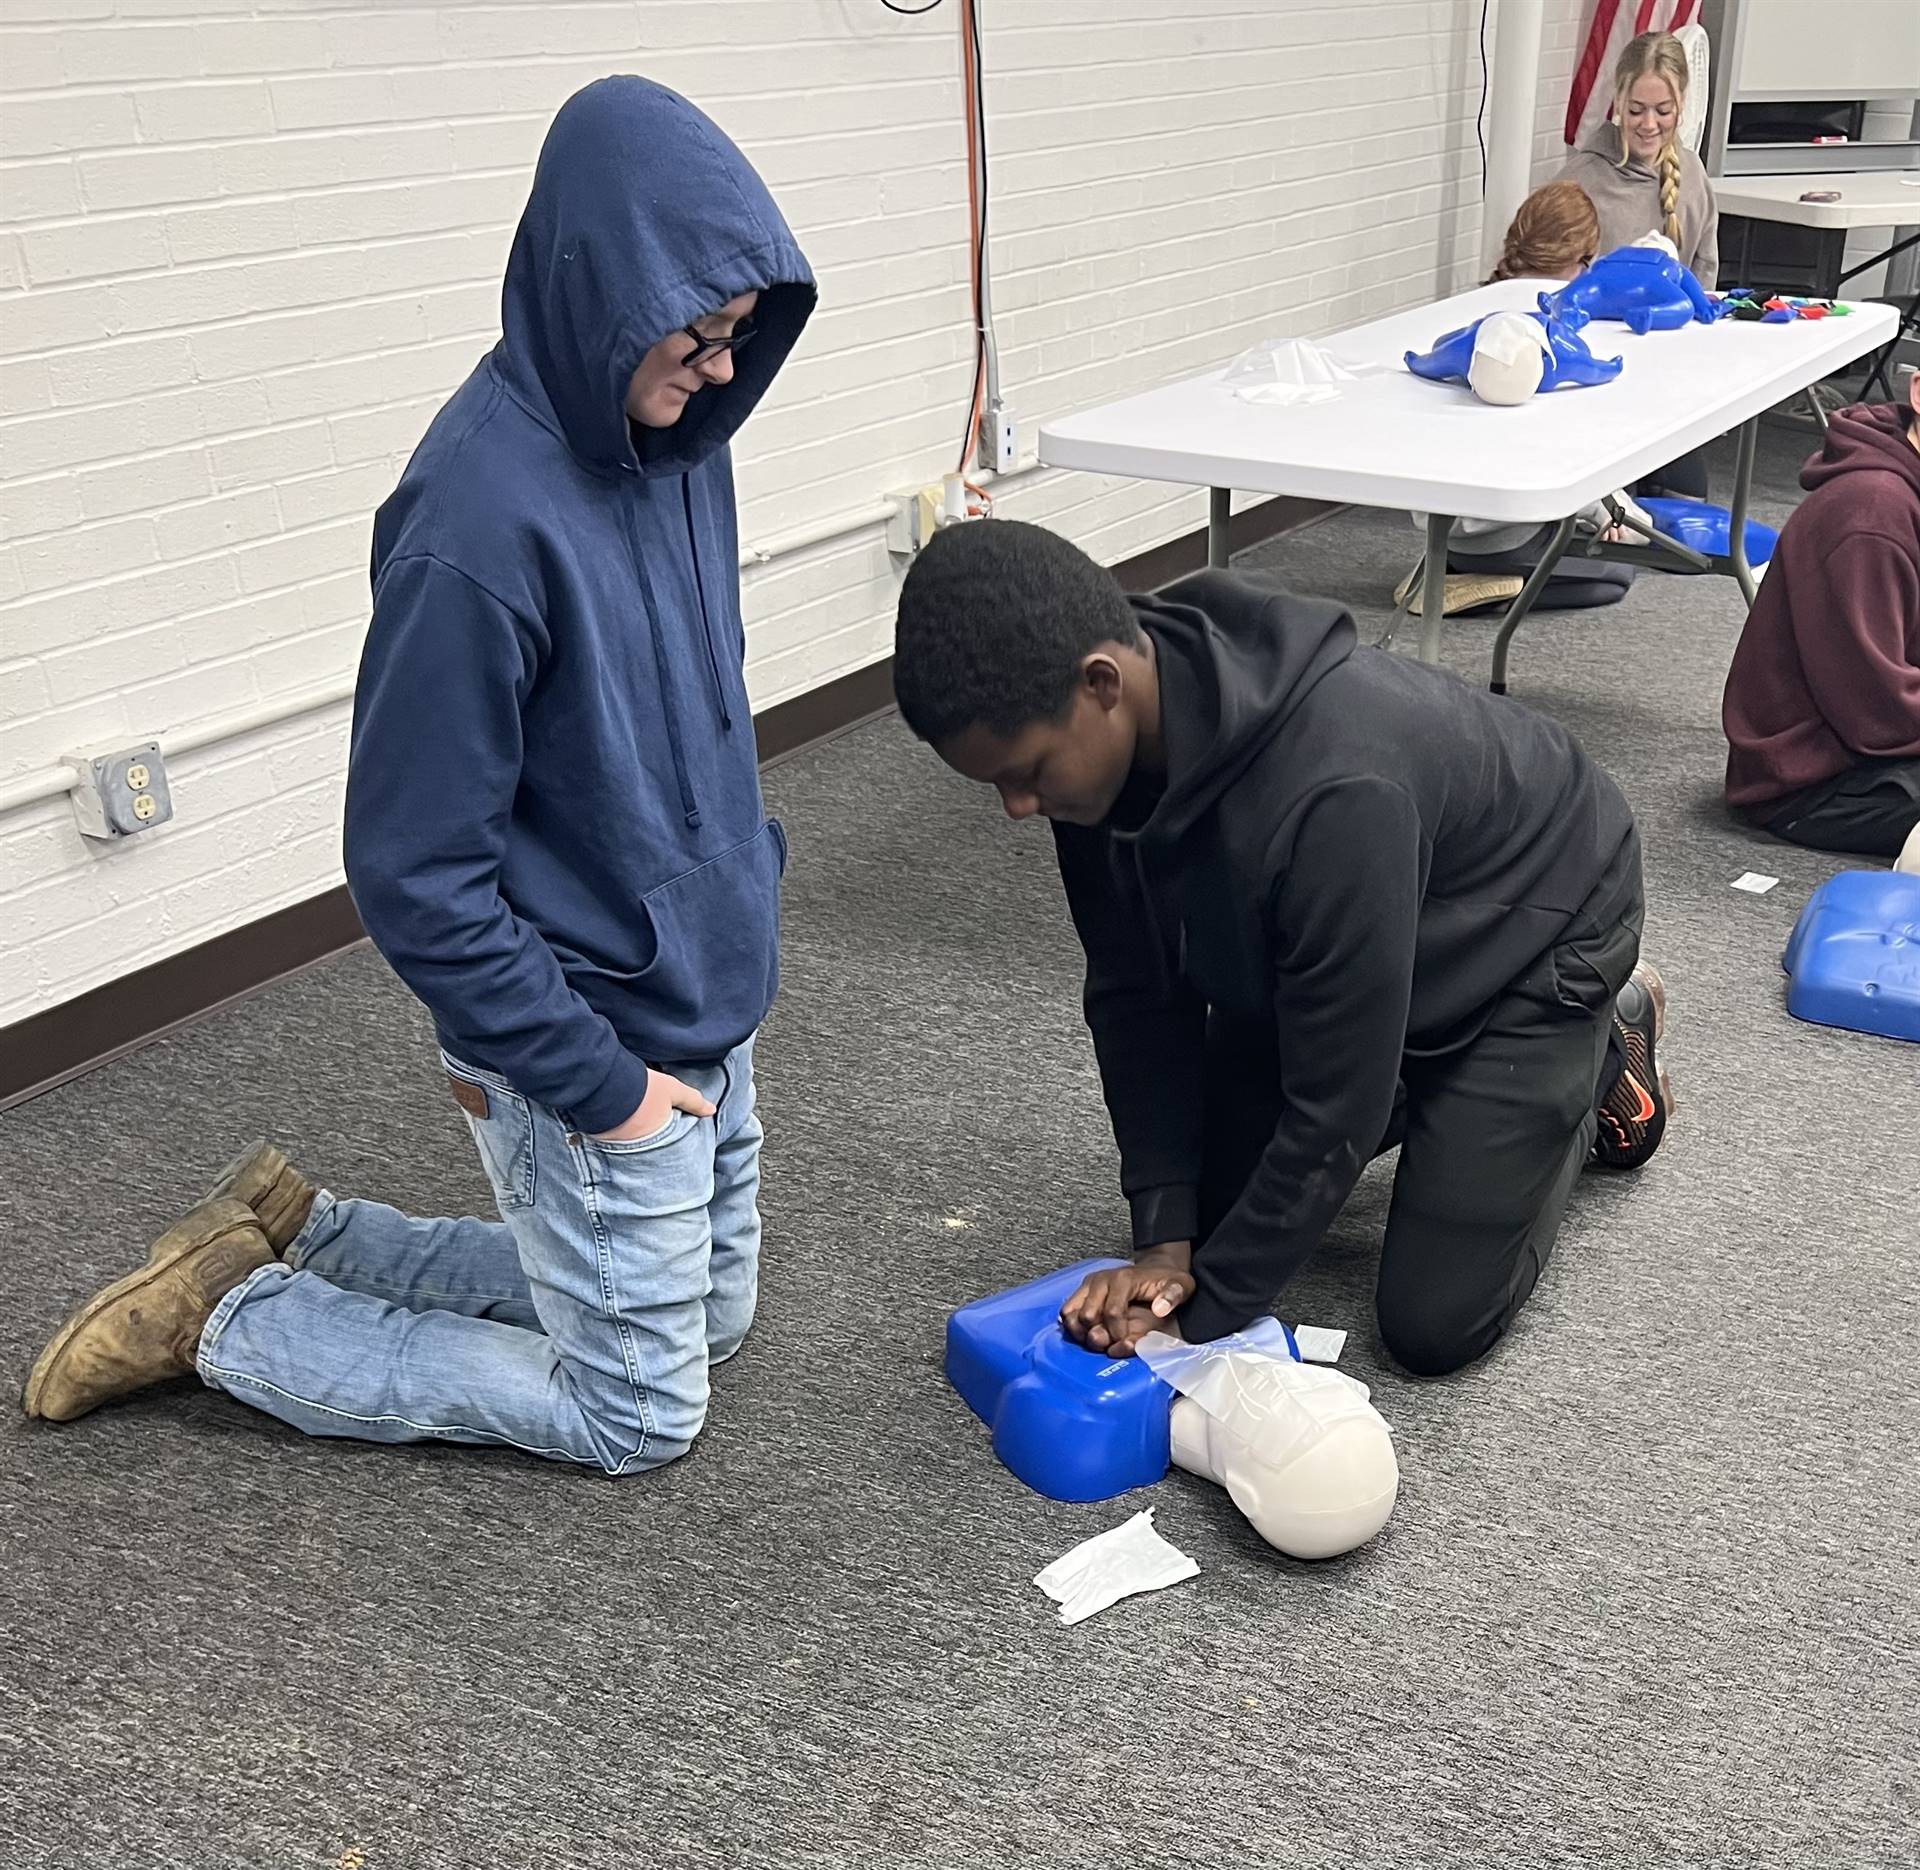 CPR / First Aid Training